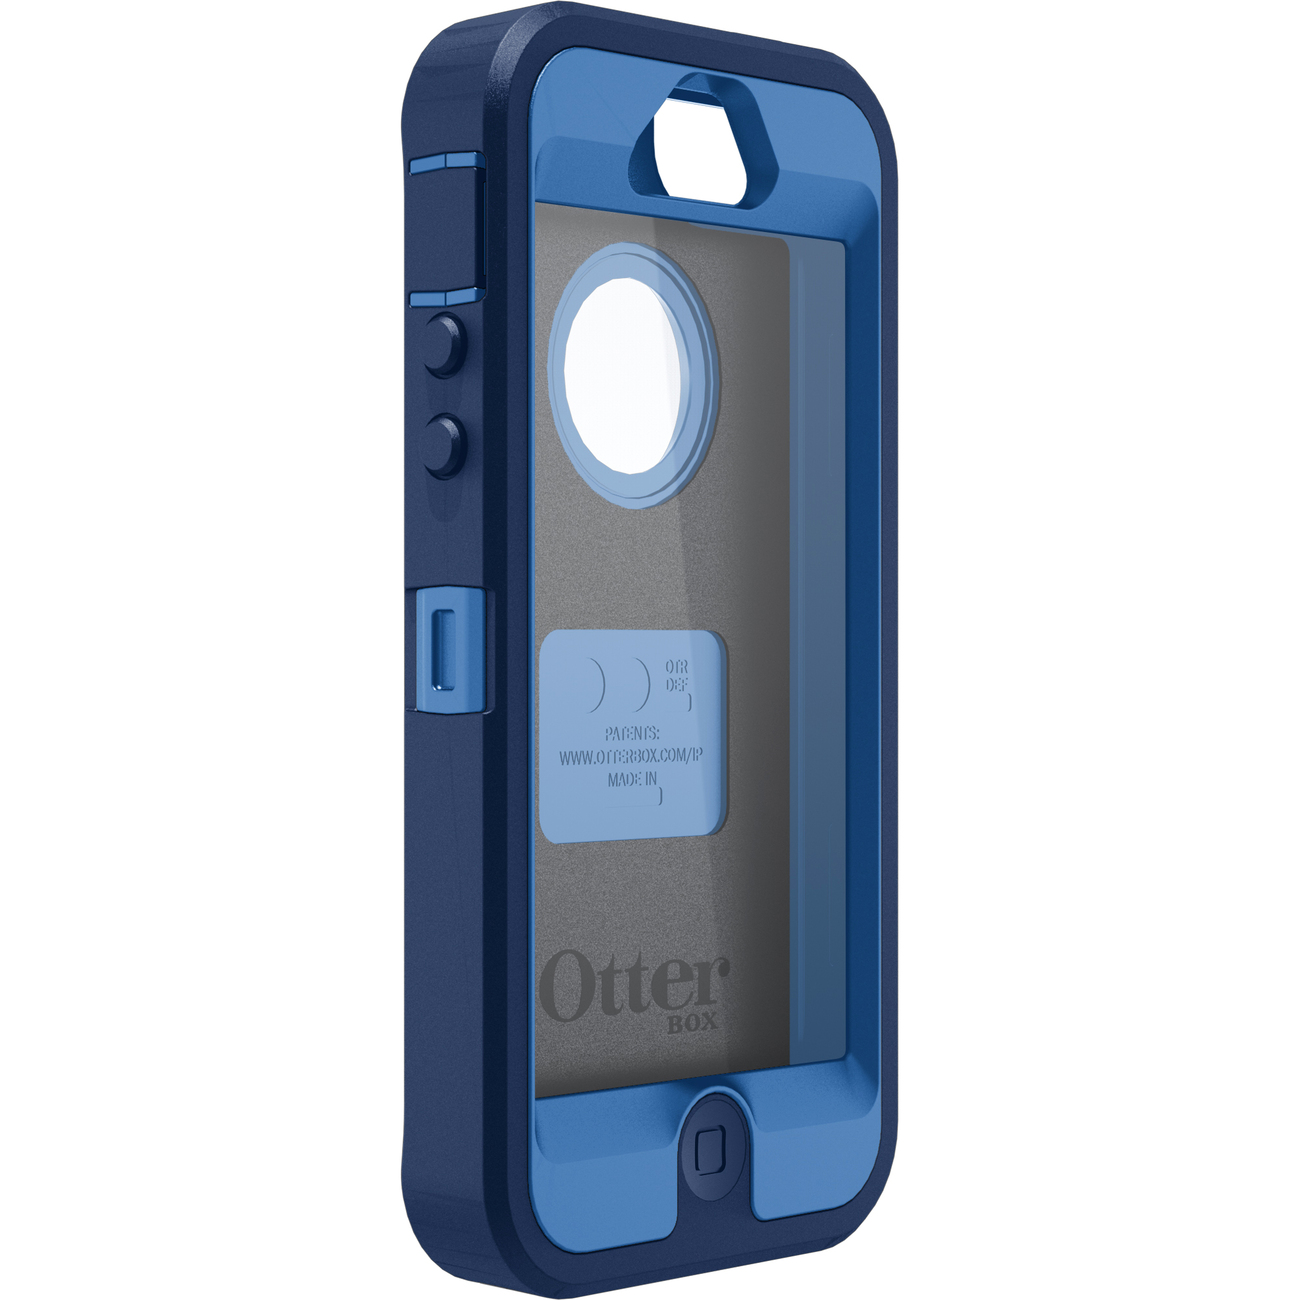 Otterbox Defender Series for iPhone 5, Night